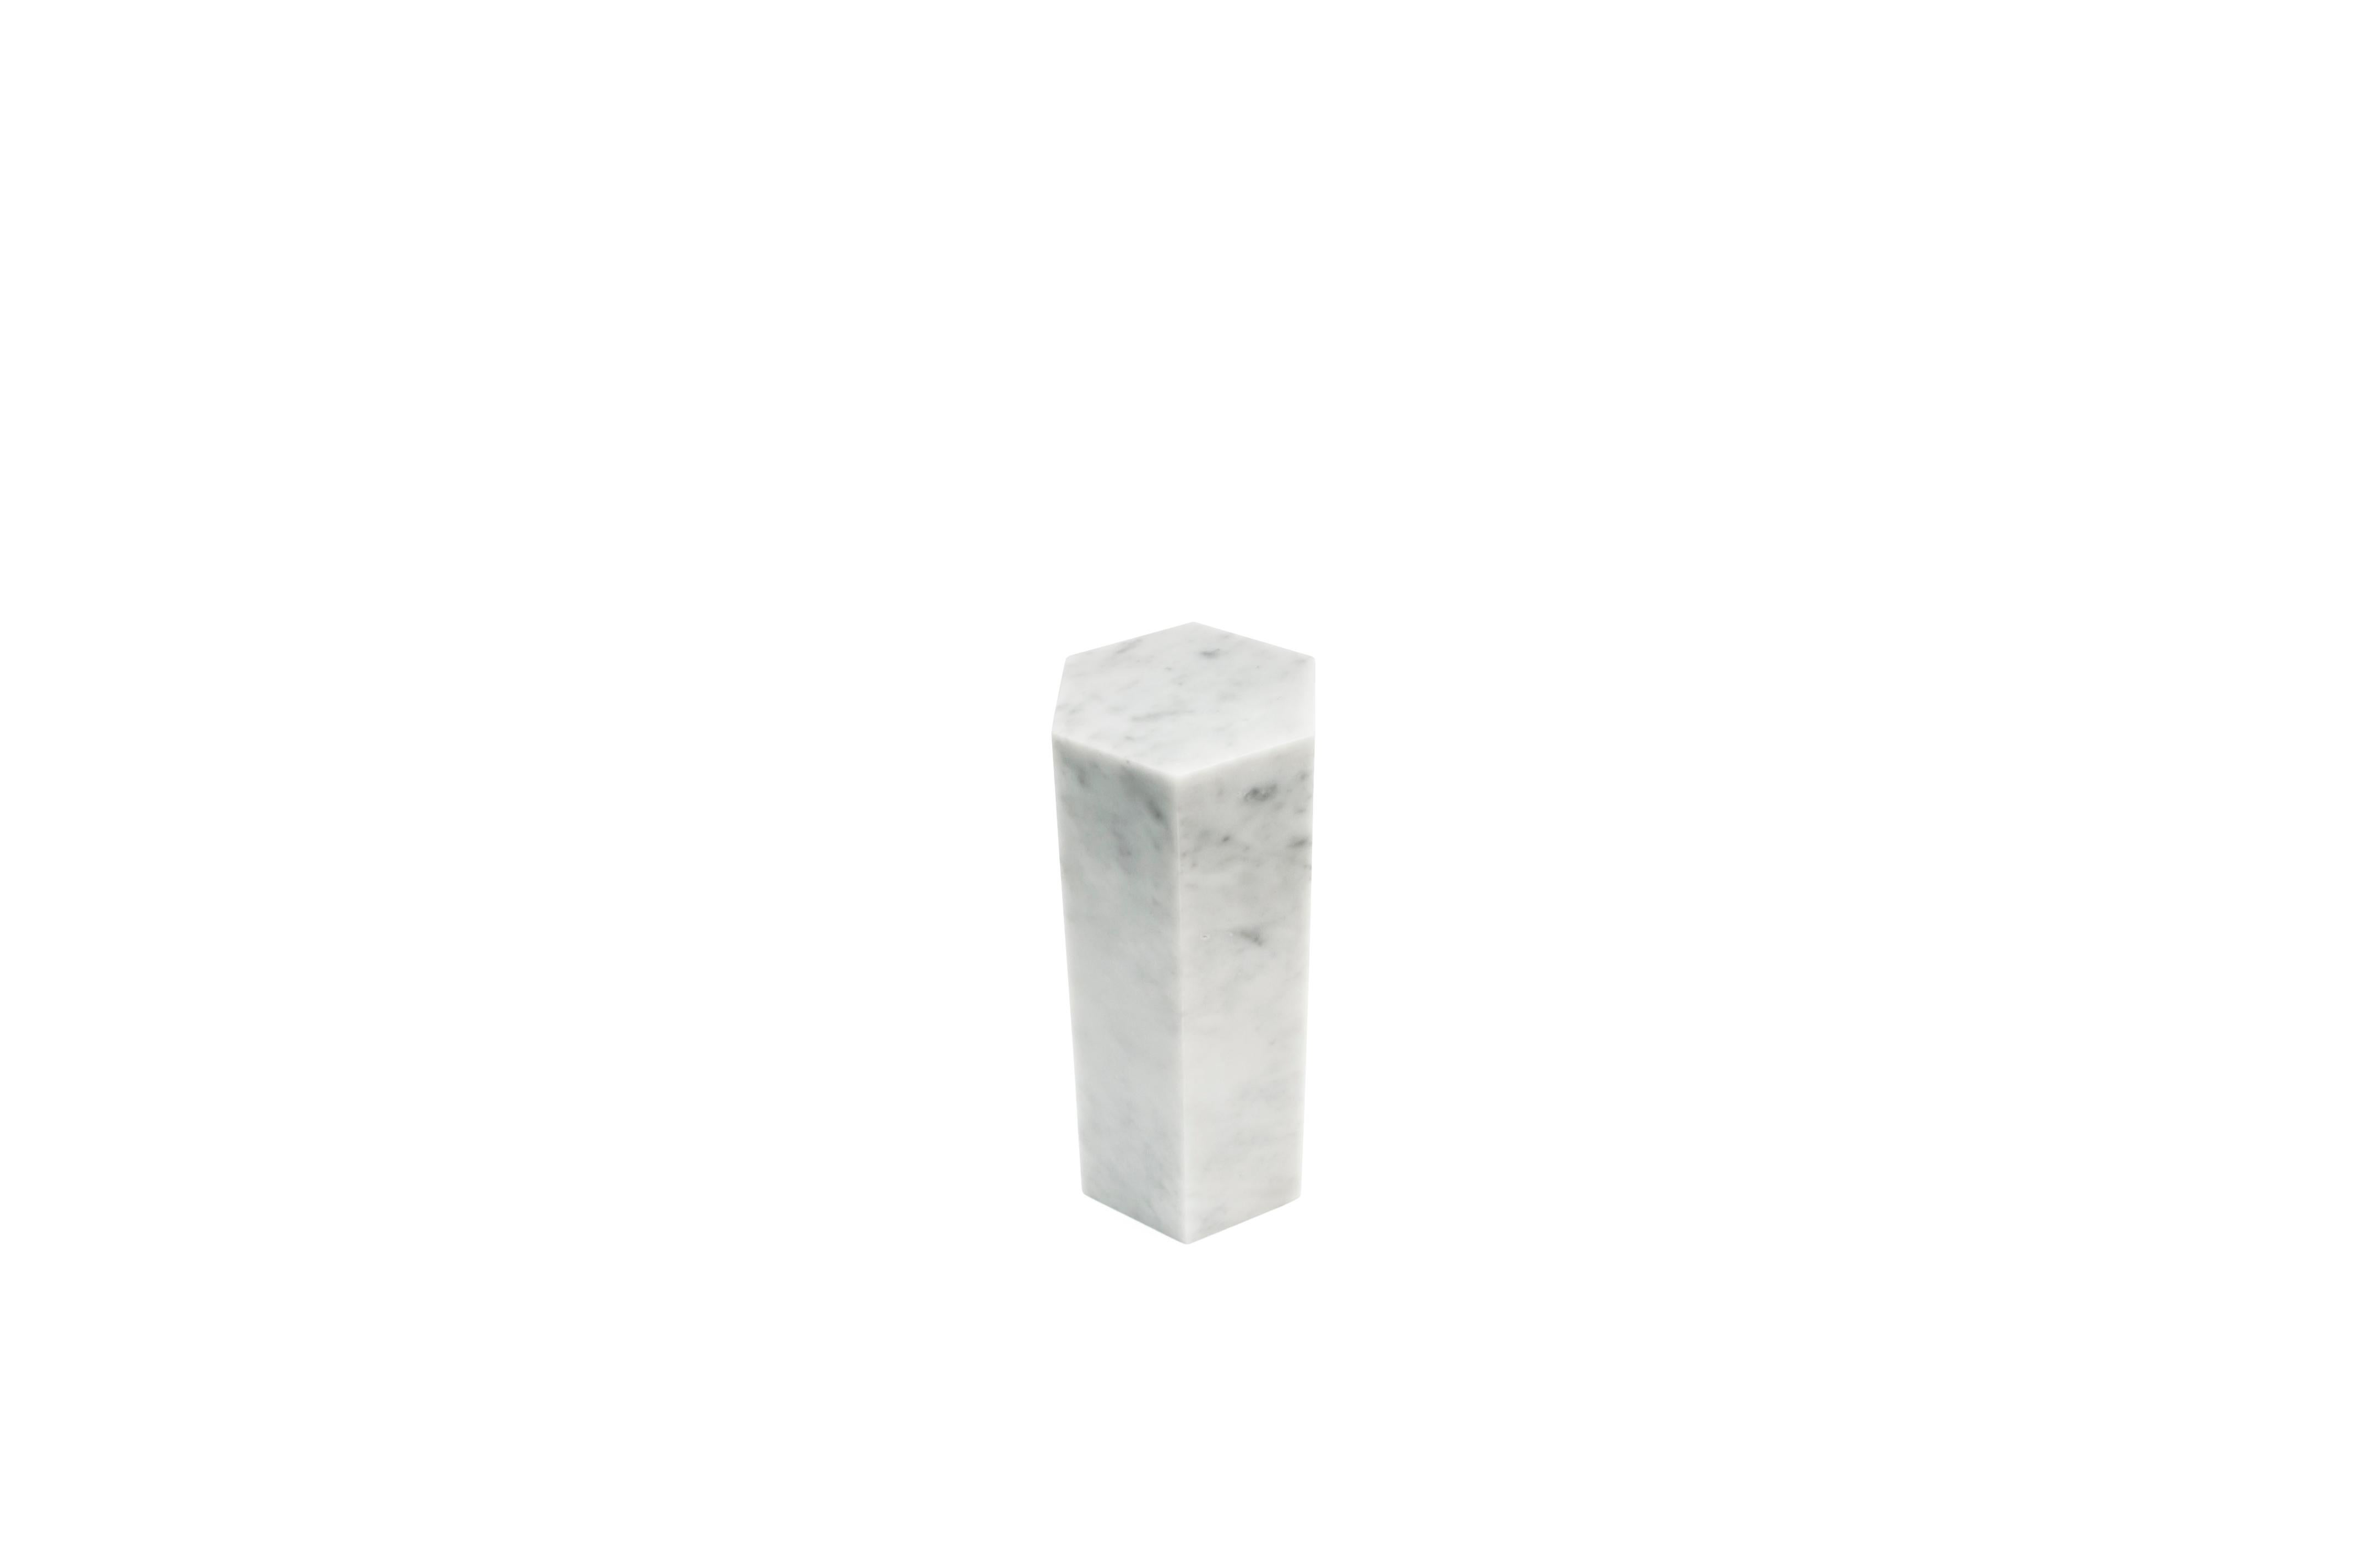 Handmade Big Decorative Prism / Bookend in Satin White Carrara Marble For Sale 1